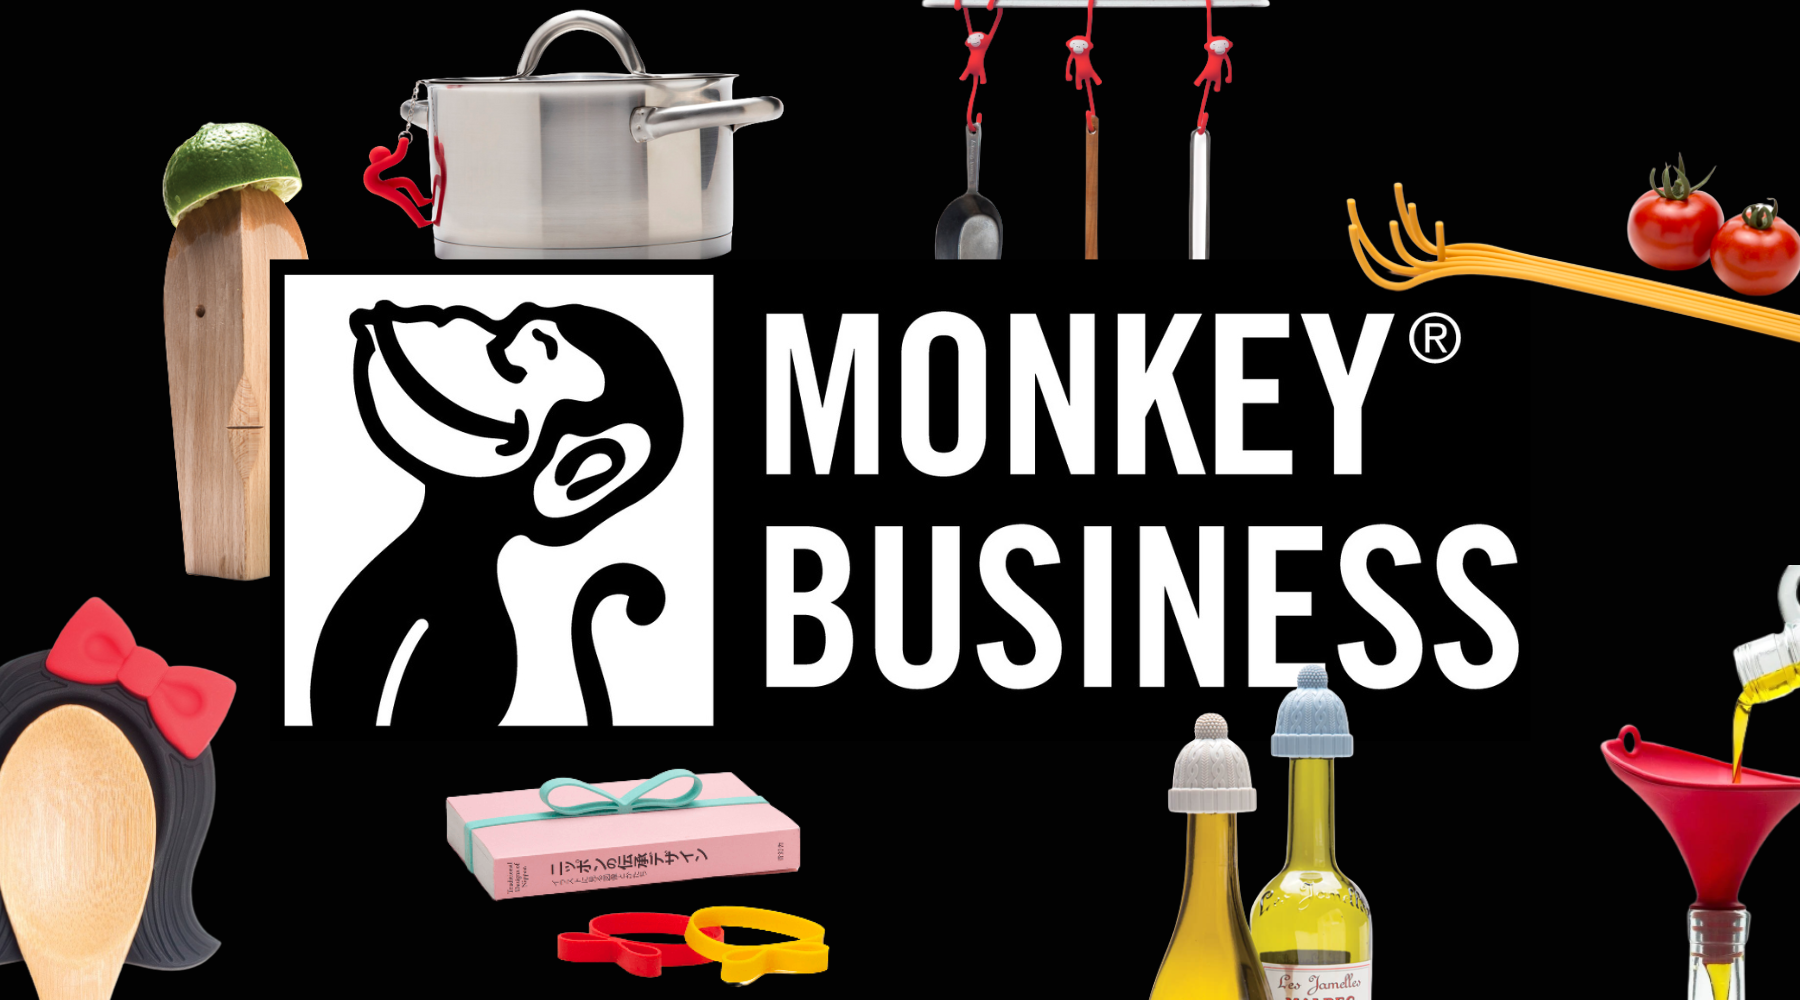 Monkey Business: "Add the Extra to the Ordinary"